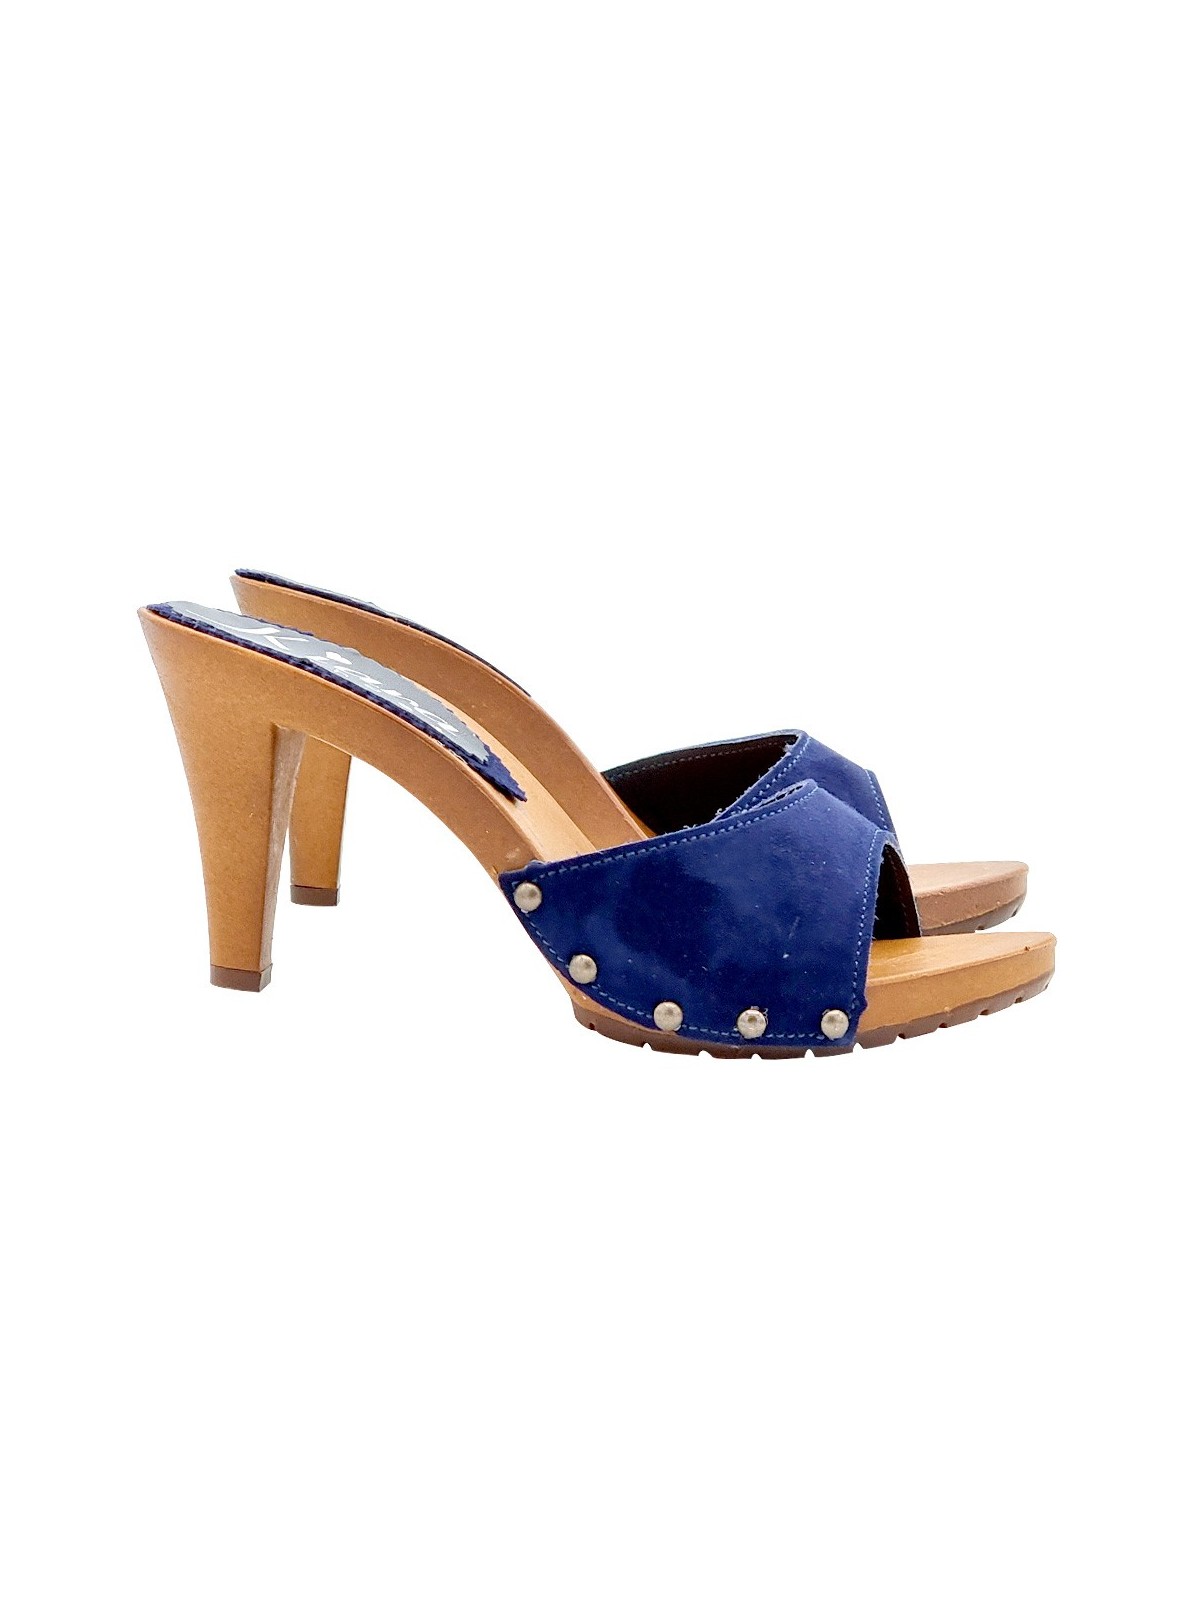 BLUE SUEDE CLOGS WITH HEEL 9